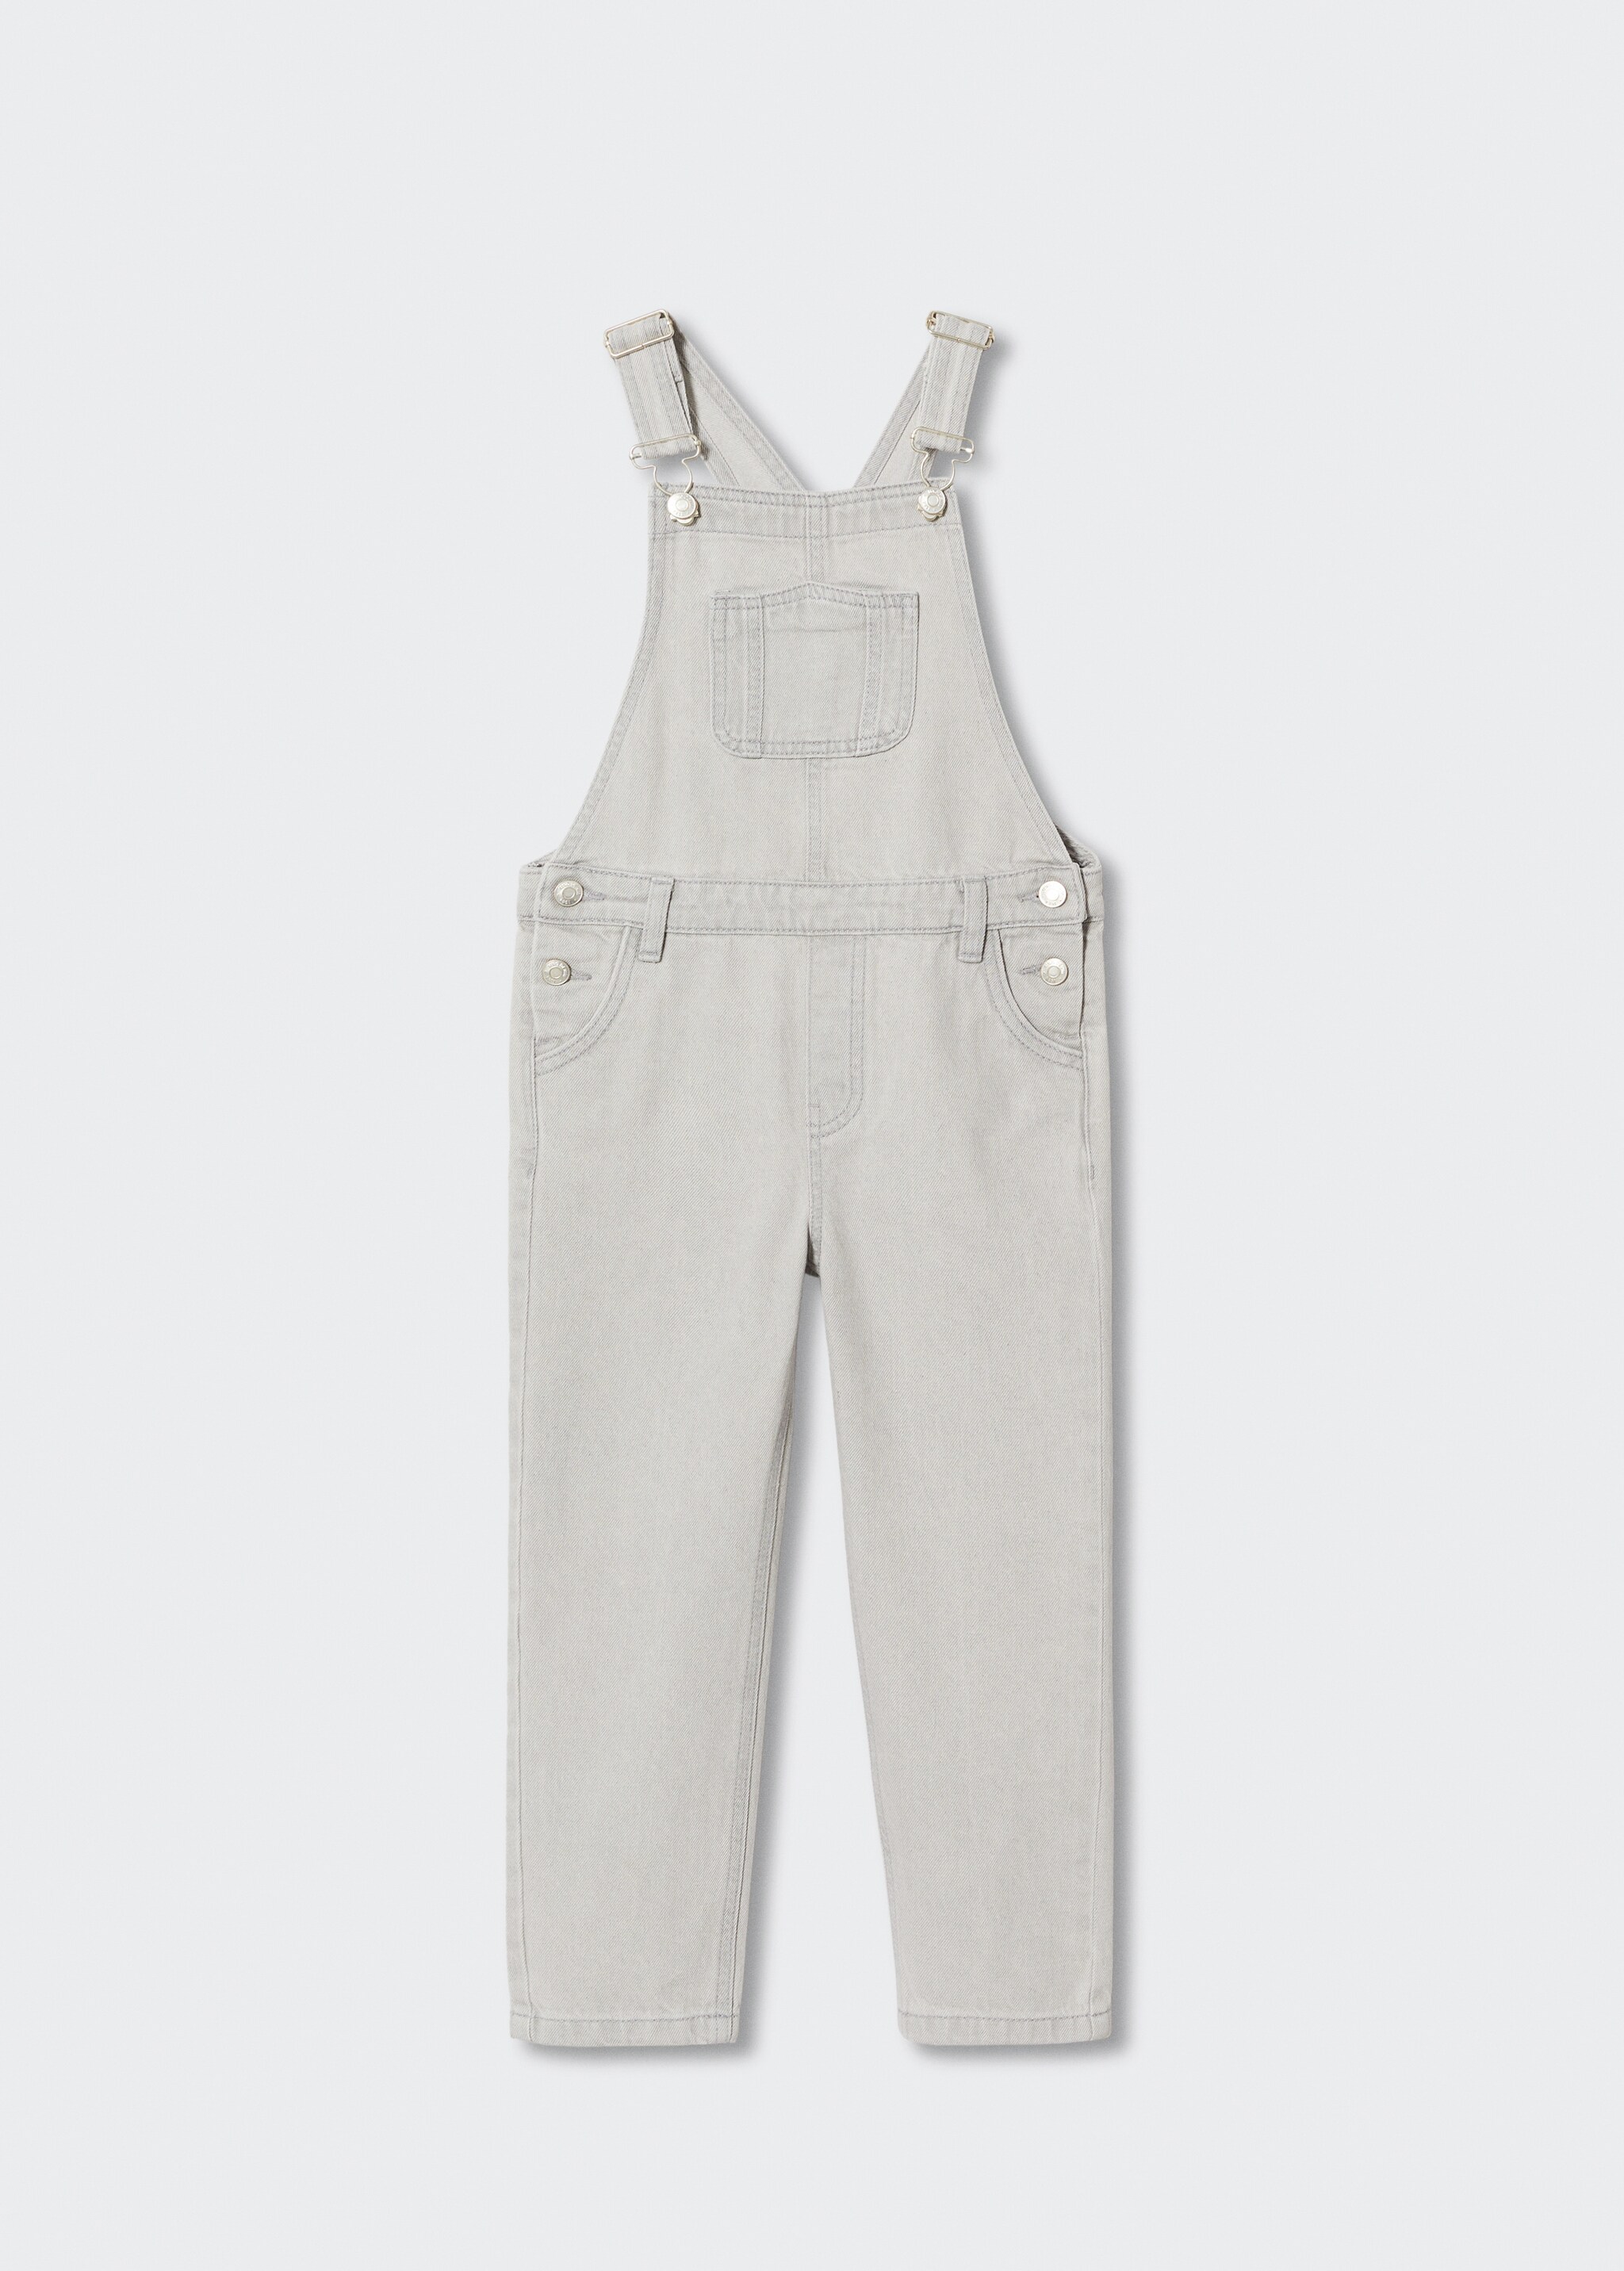 Lined denim dungarees - Article without model